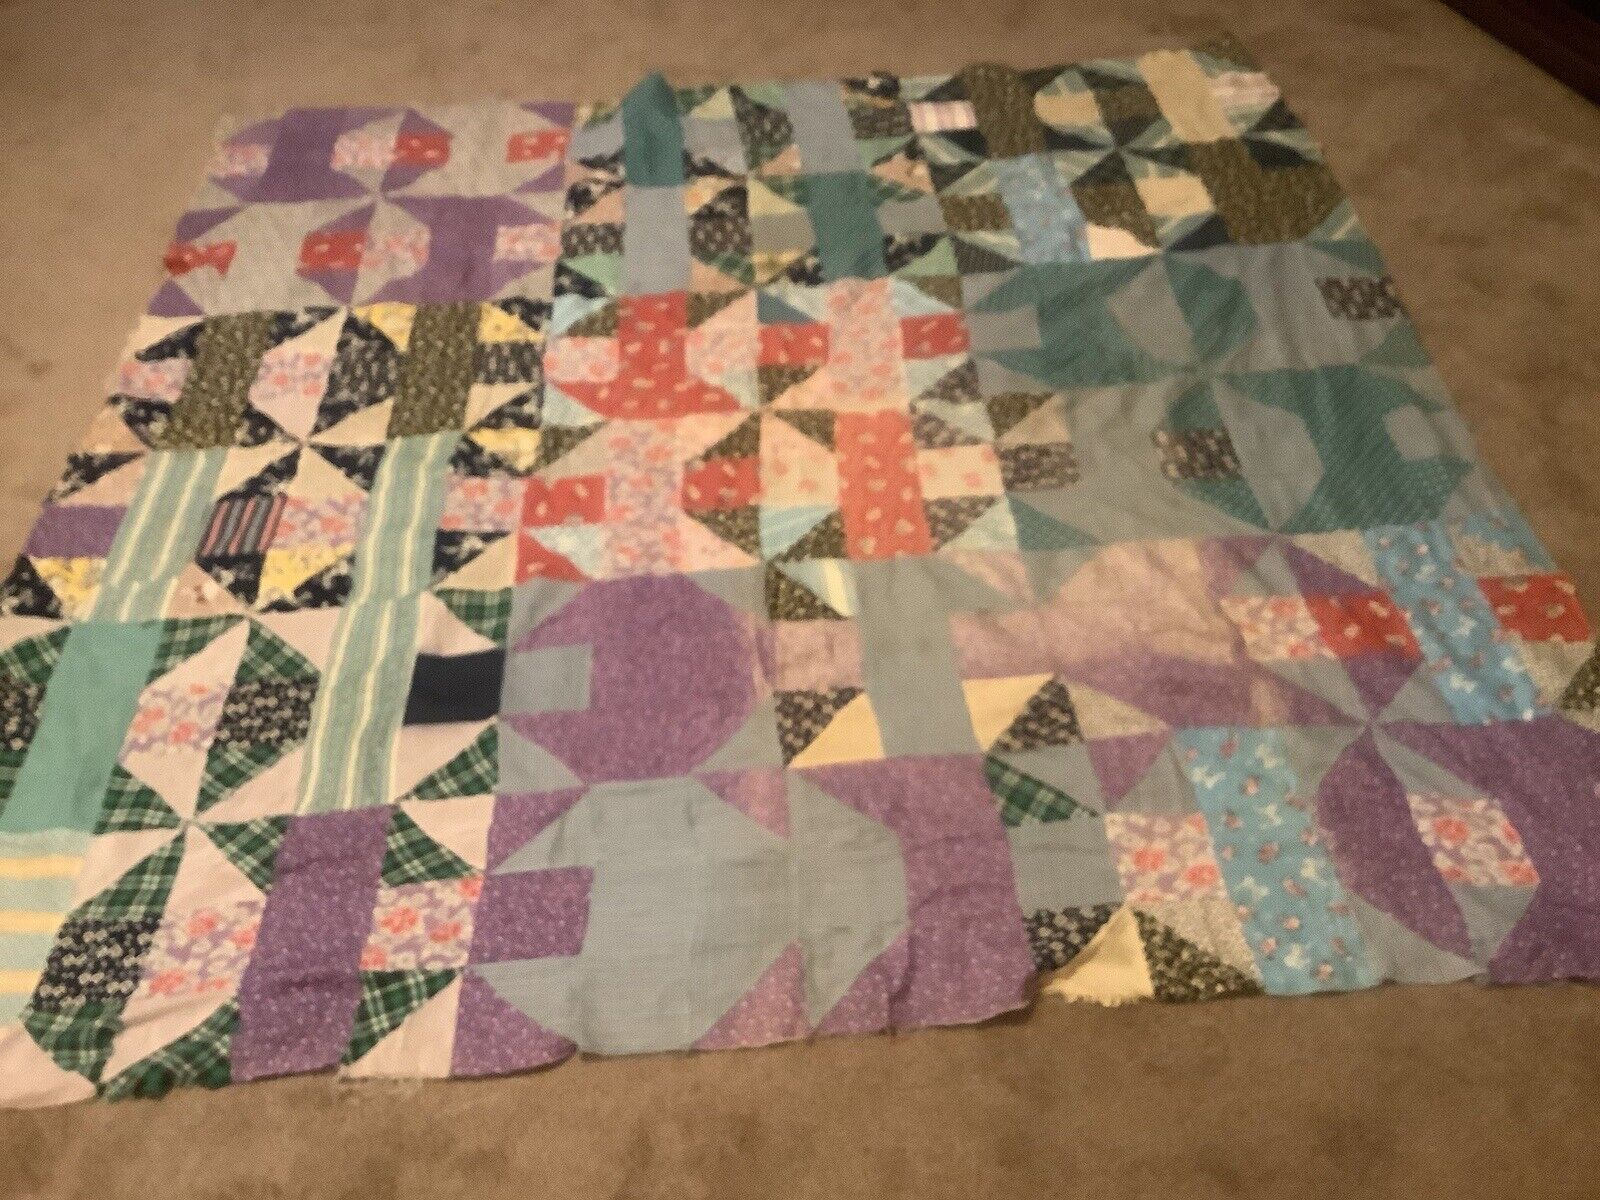 Vintage Quilt Top Cotton 65”sq. 11” Patch, Hand Pieced Great Old Fabric